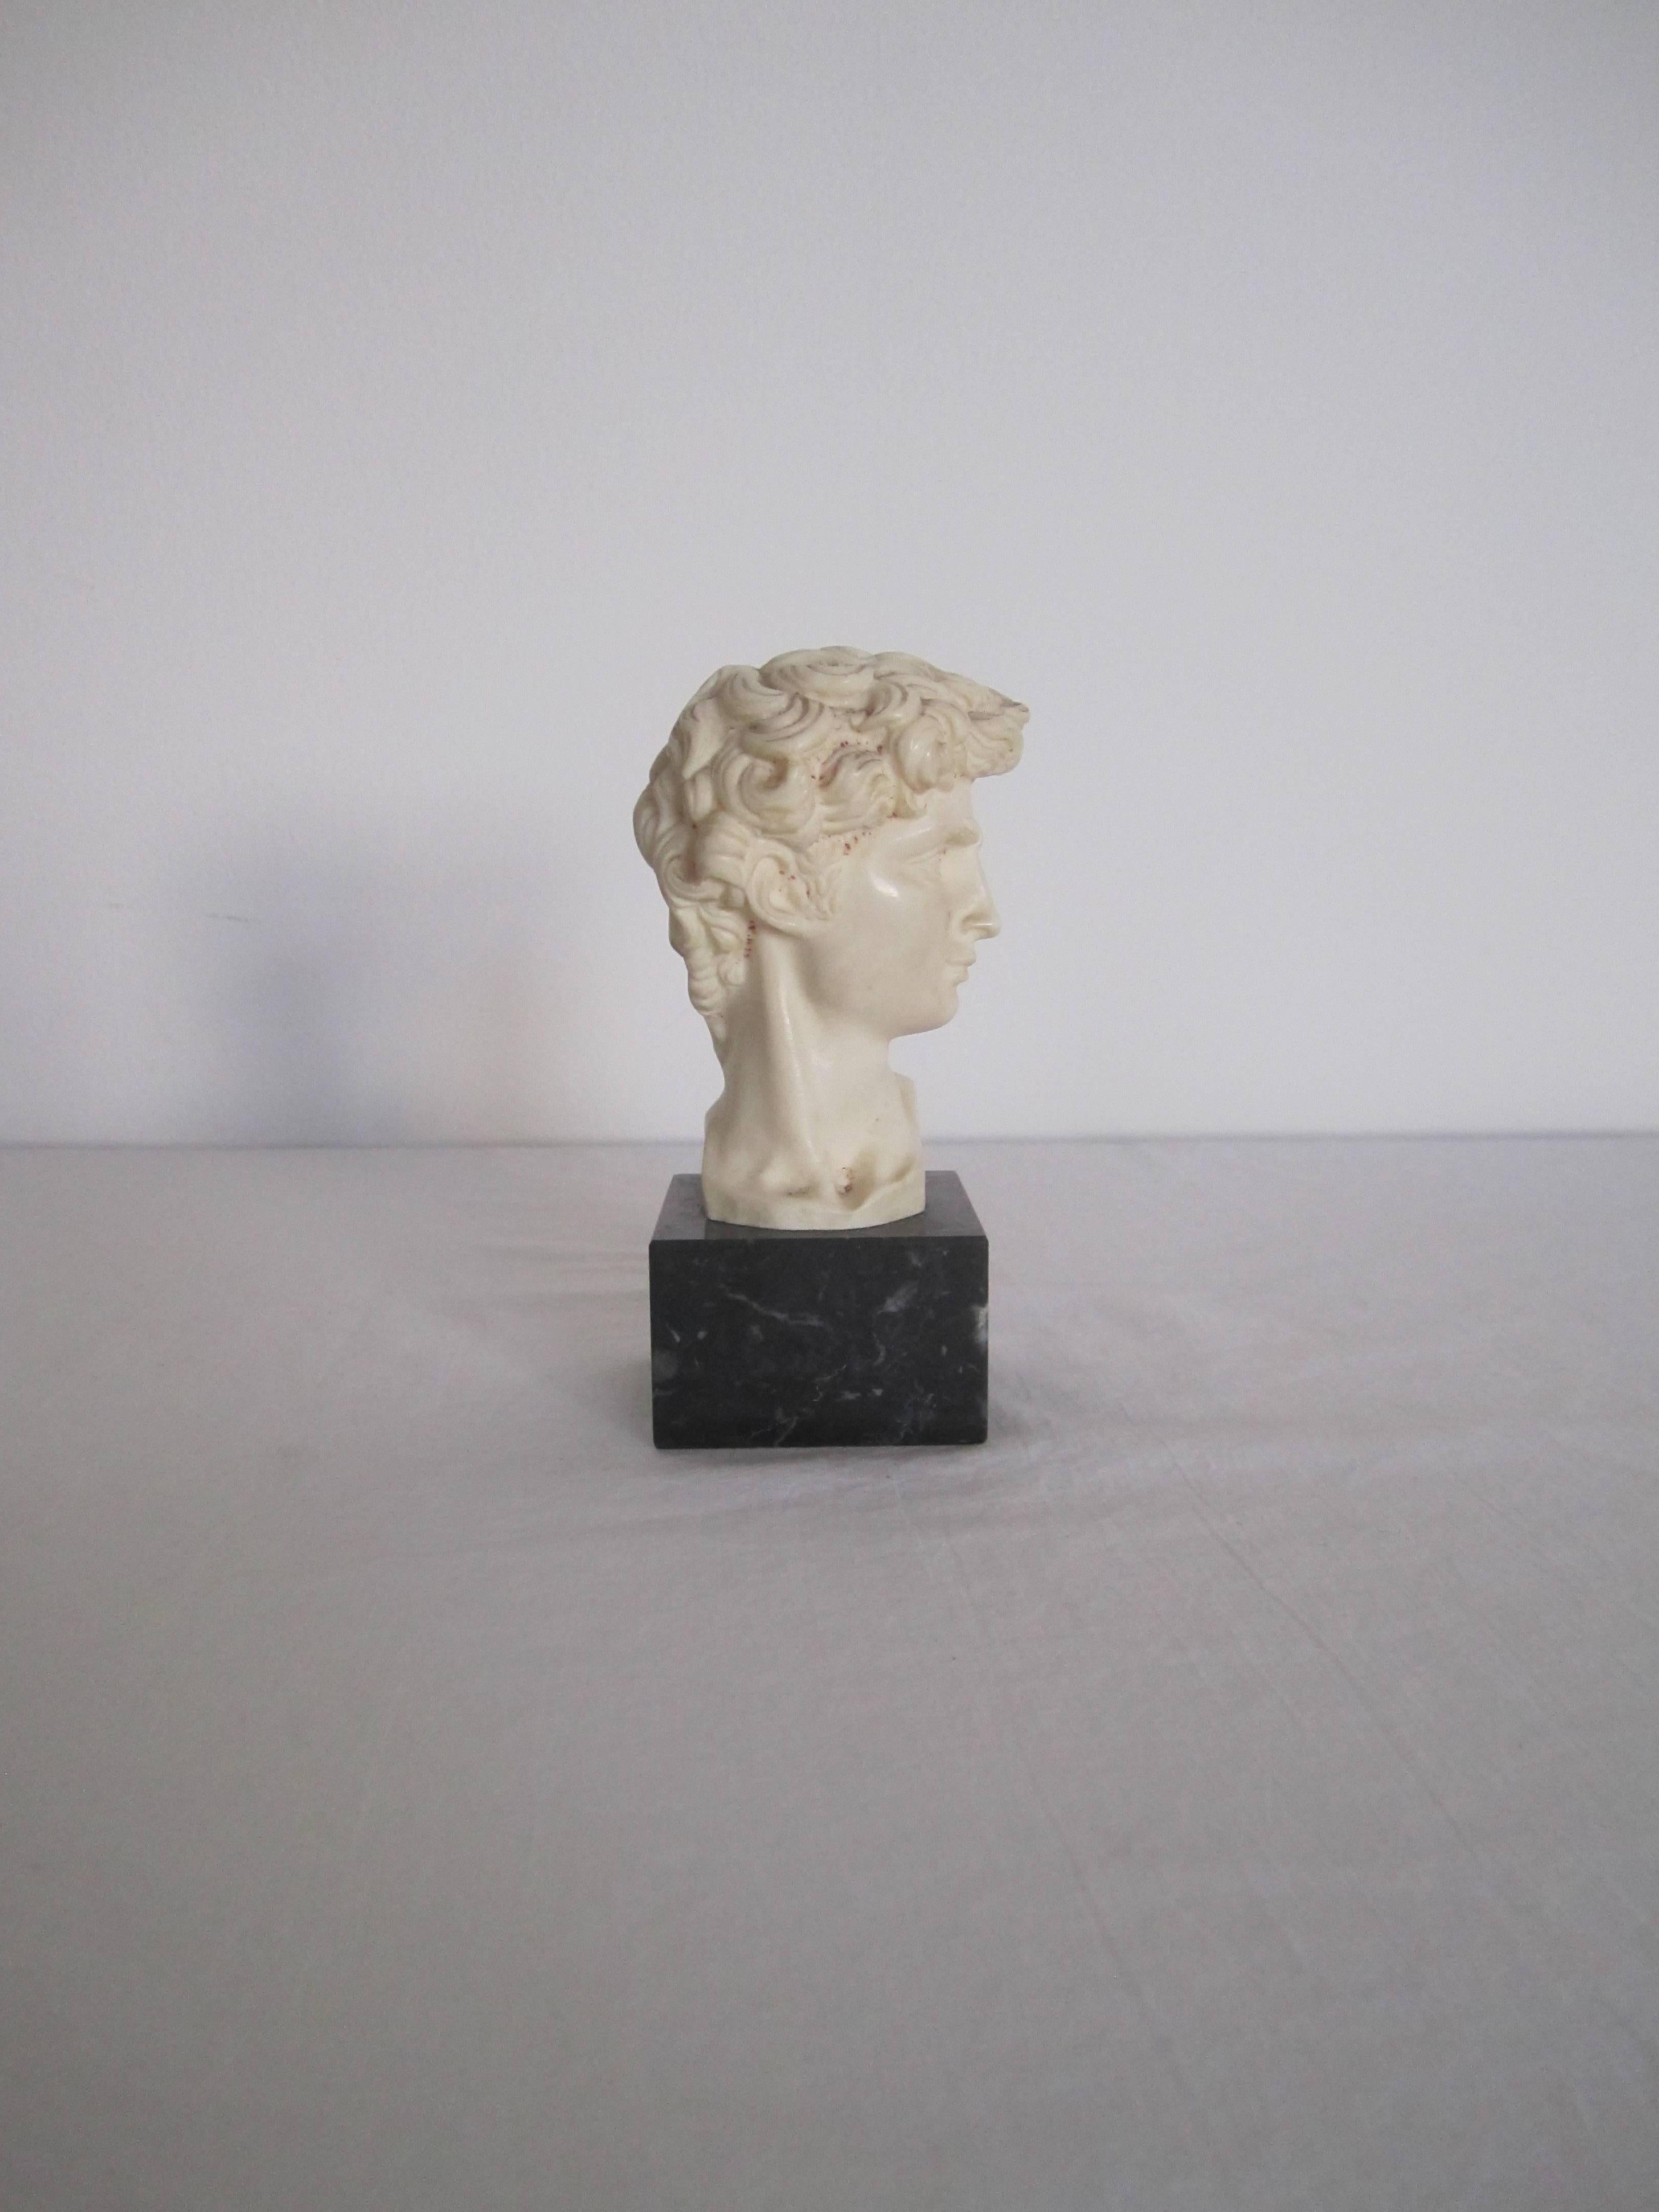 20th Century Classic Roman Bust on Black Marble Base Signed by Sculptor G. Ruggeri, Italy